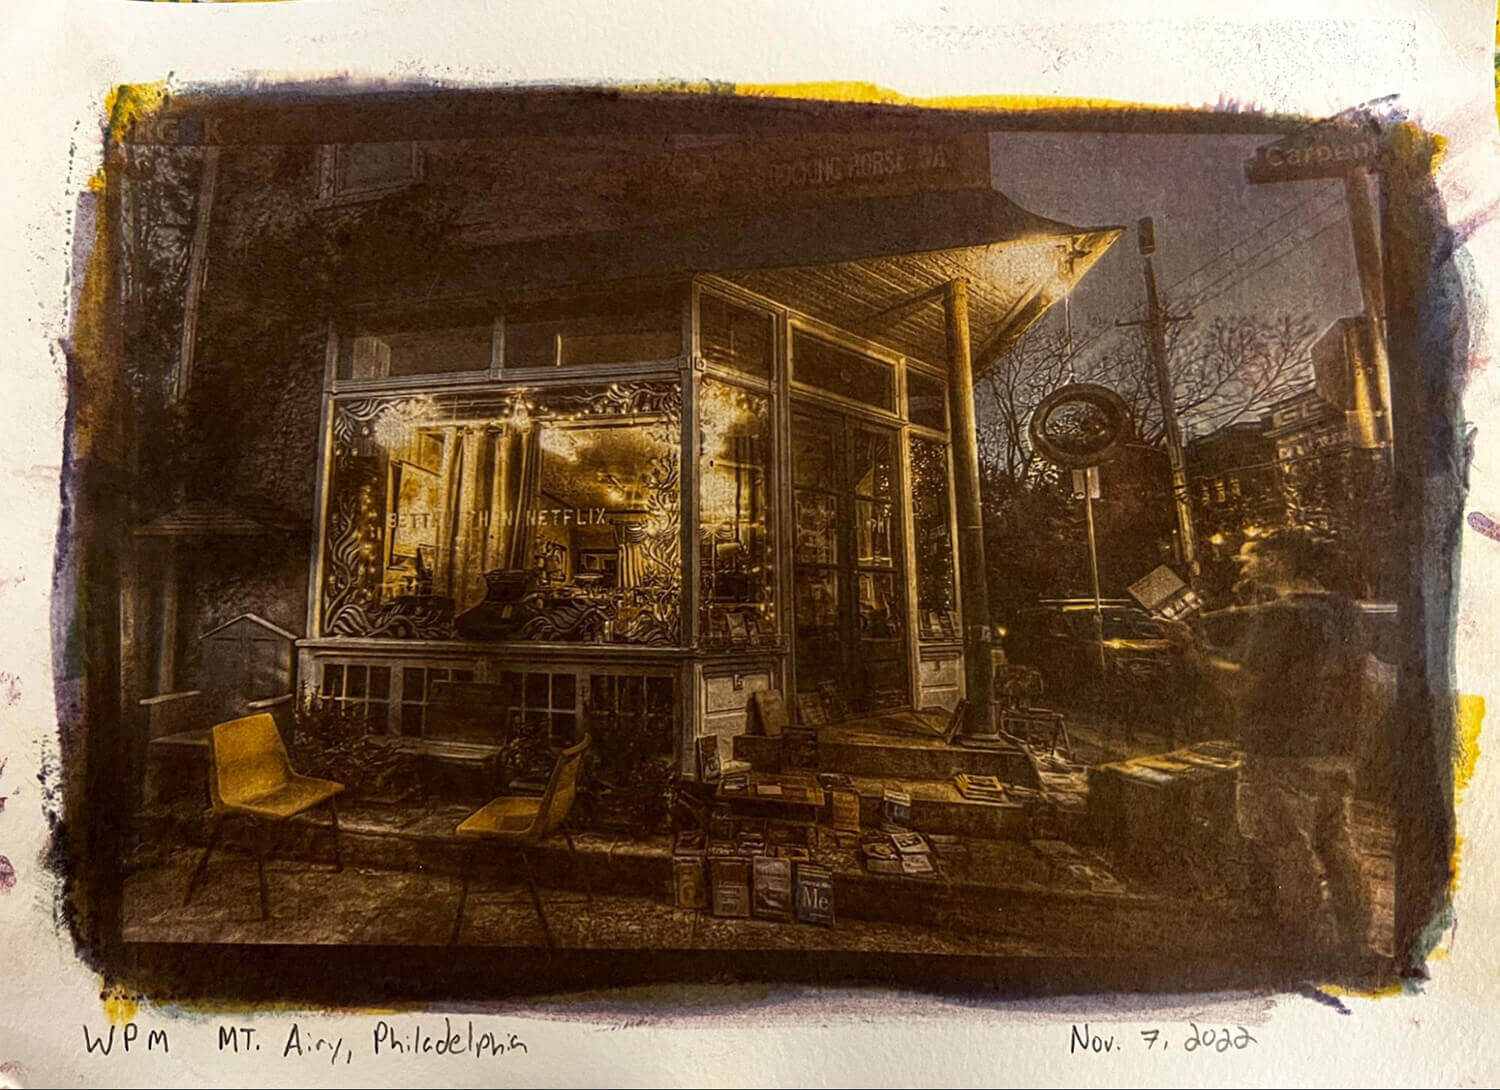 My best print, to date. The WPM Typewriter Store, Mt Airy, Philadelphia. CMYK Solarfast print, made from digital negatives generated from a series of cell phone photos. 